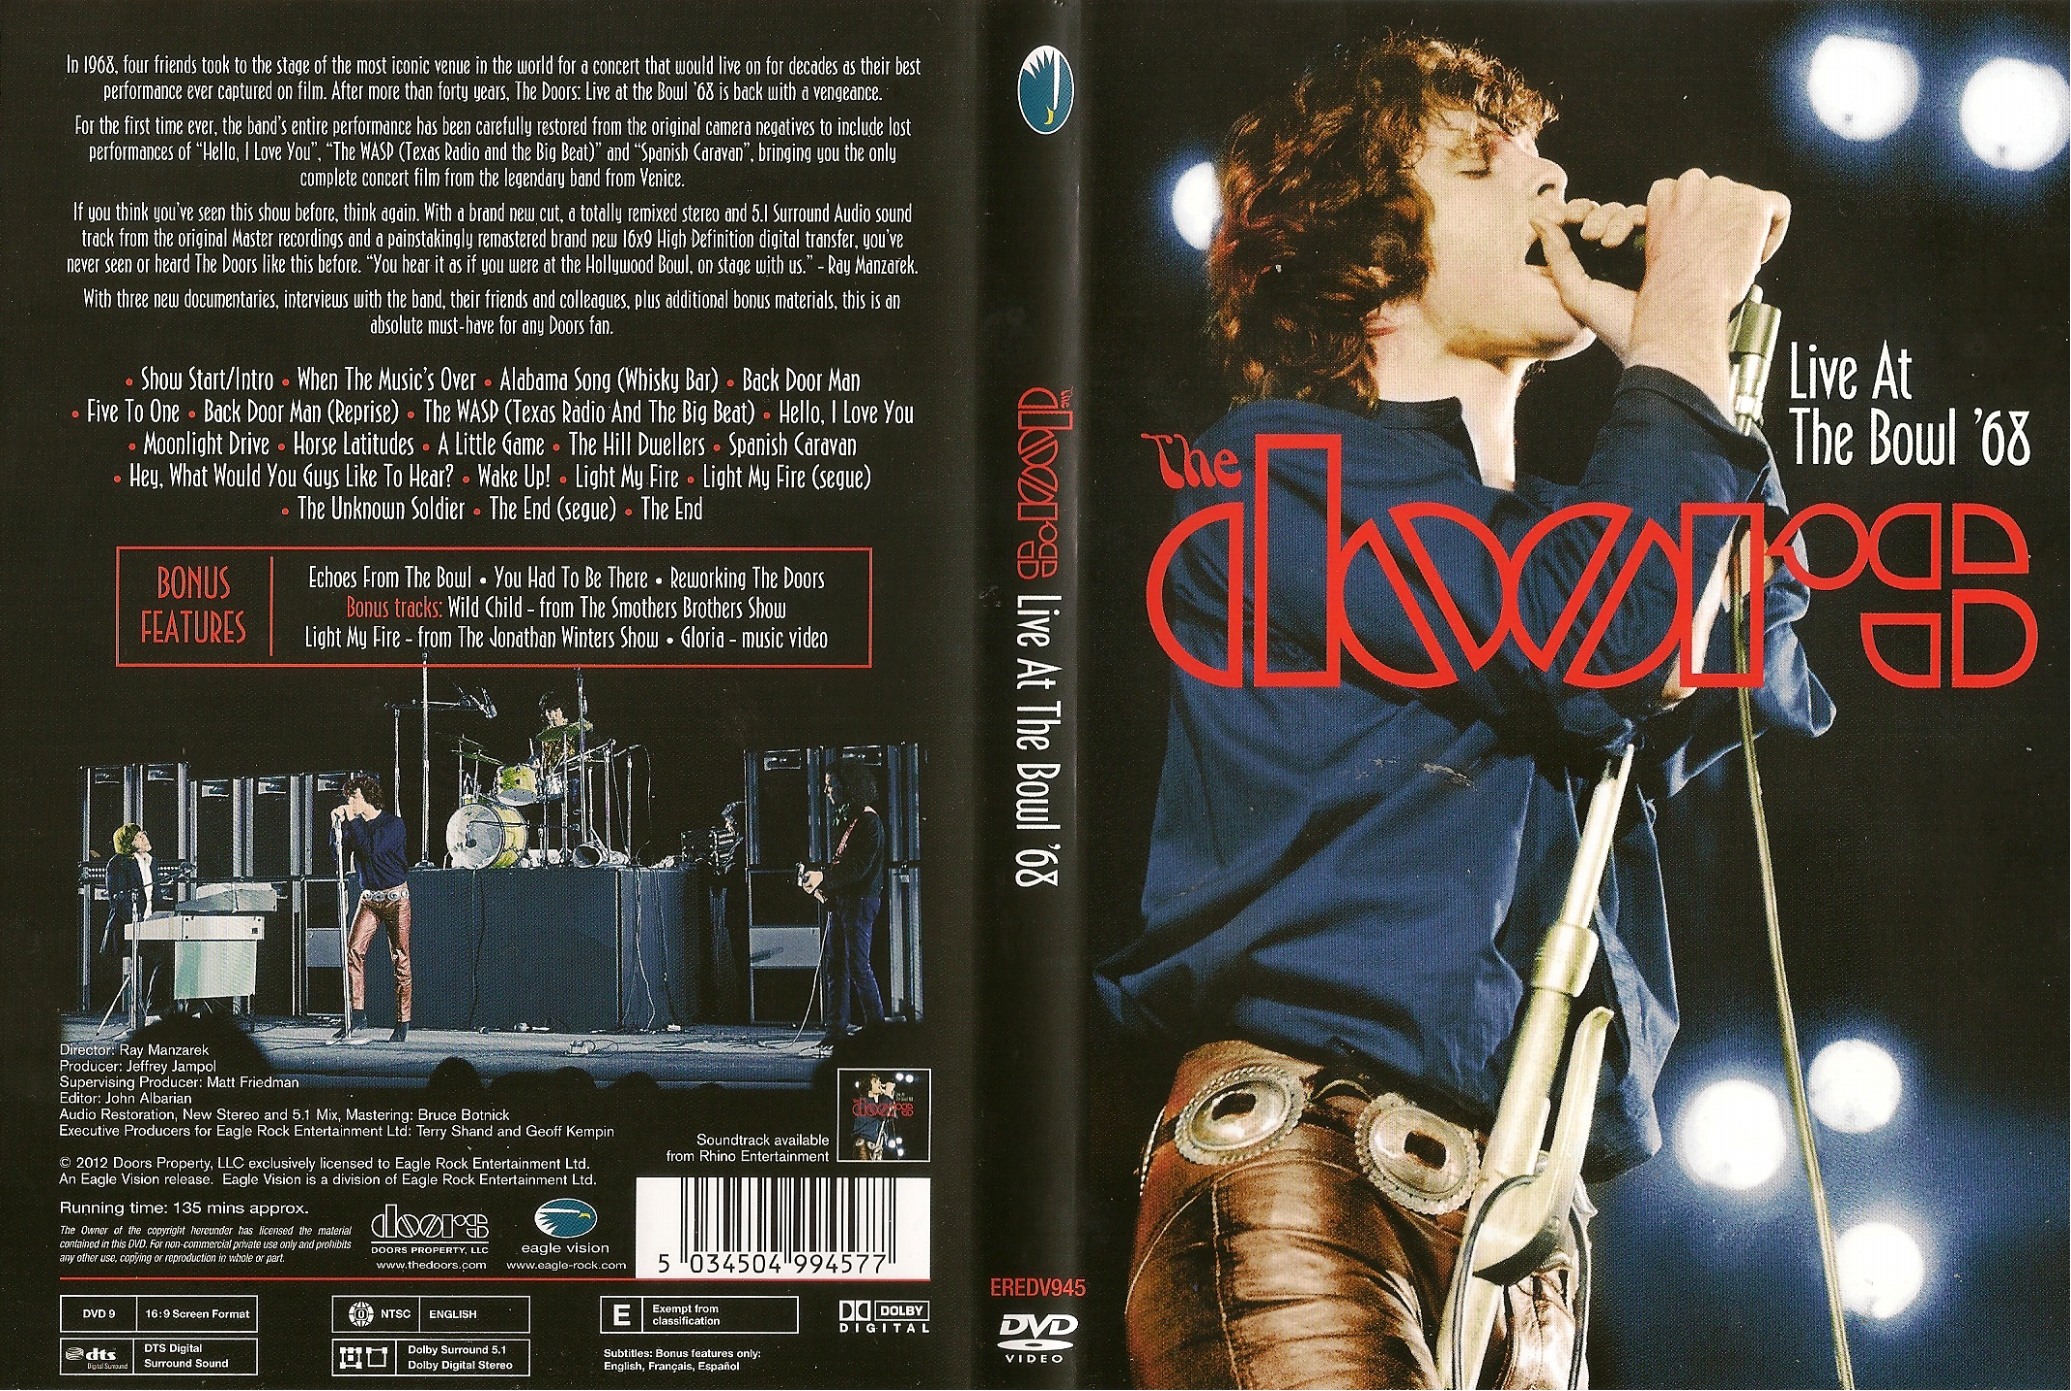 Jaquette DVD The Doors Live At The Bowl 